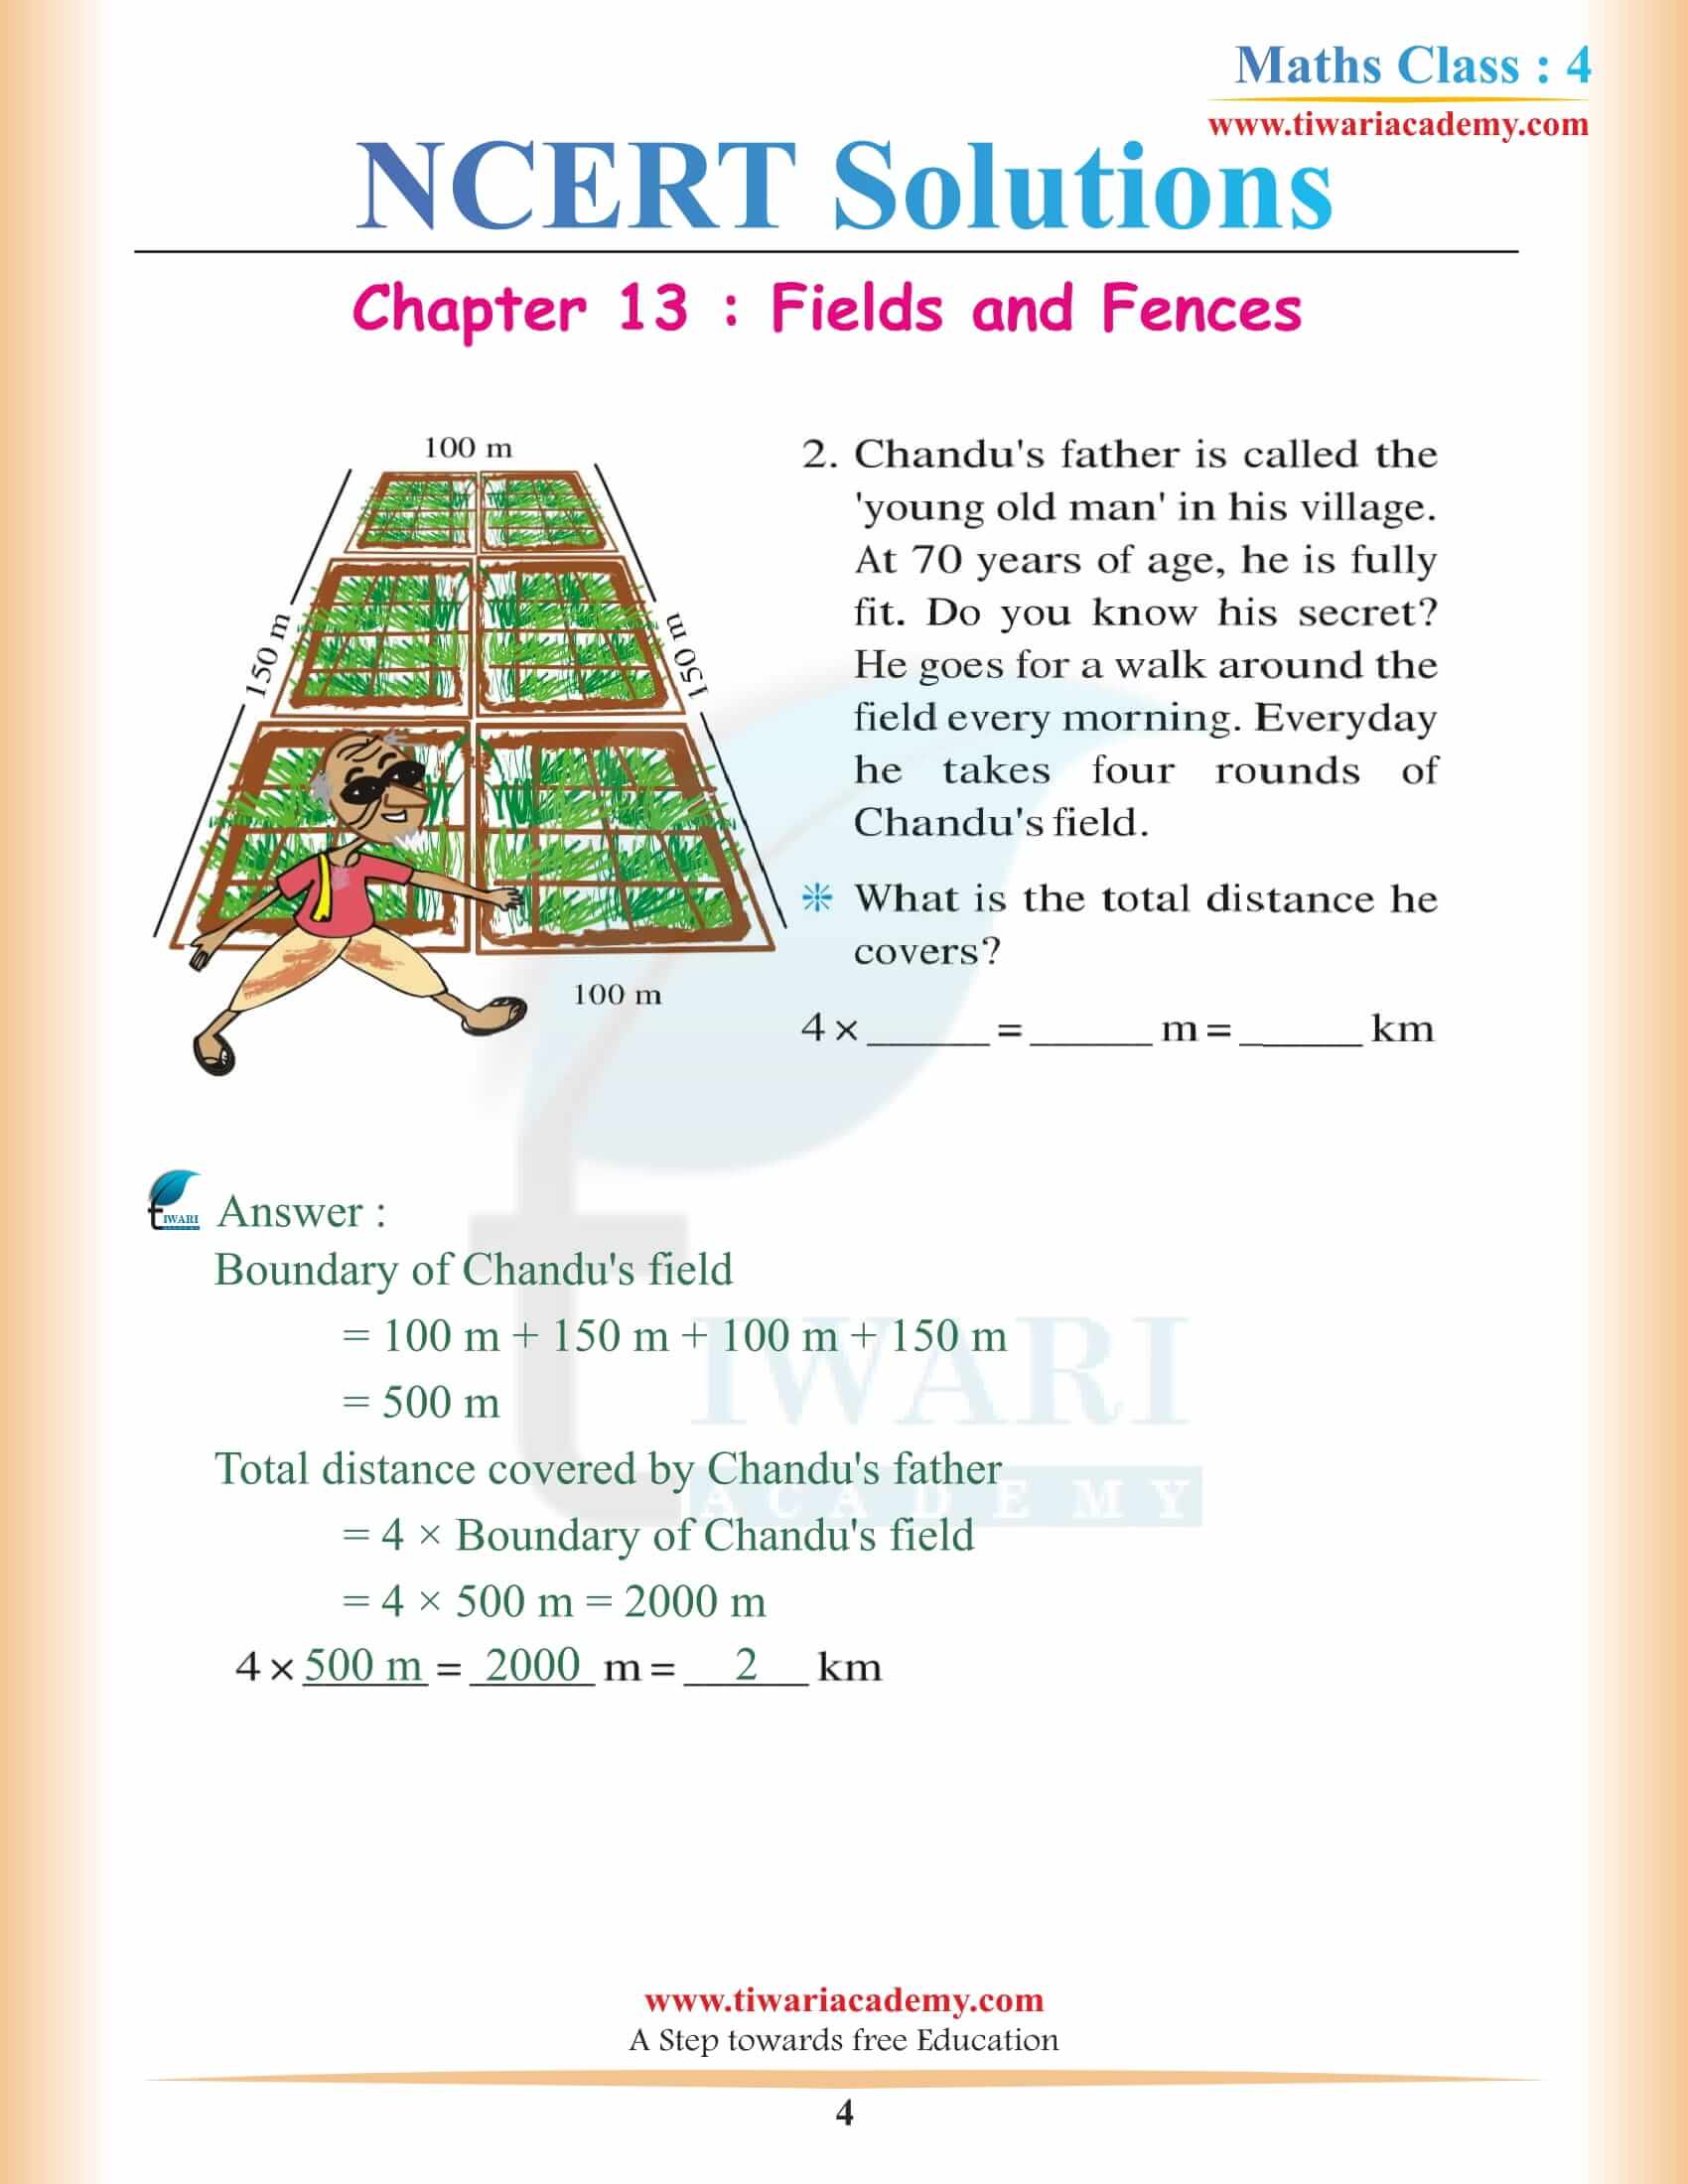 NCERT Solutions for Class 4 Maths Chapter 13 in English Medium